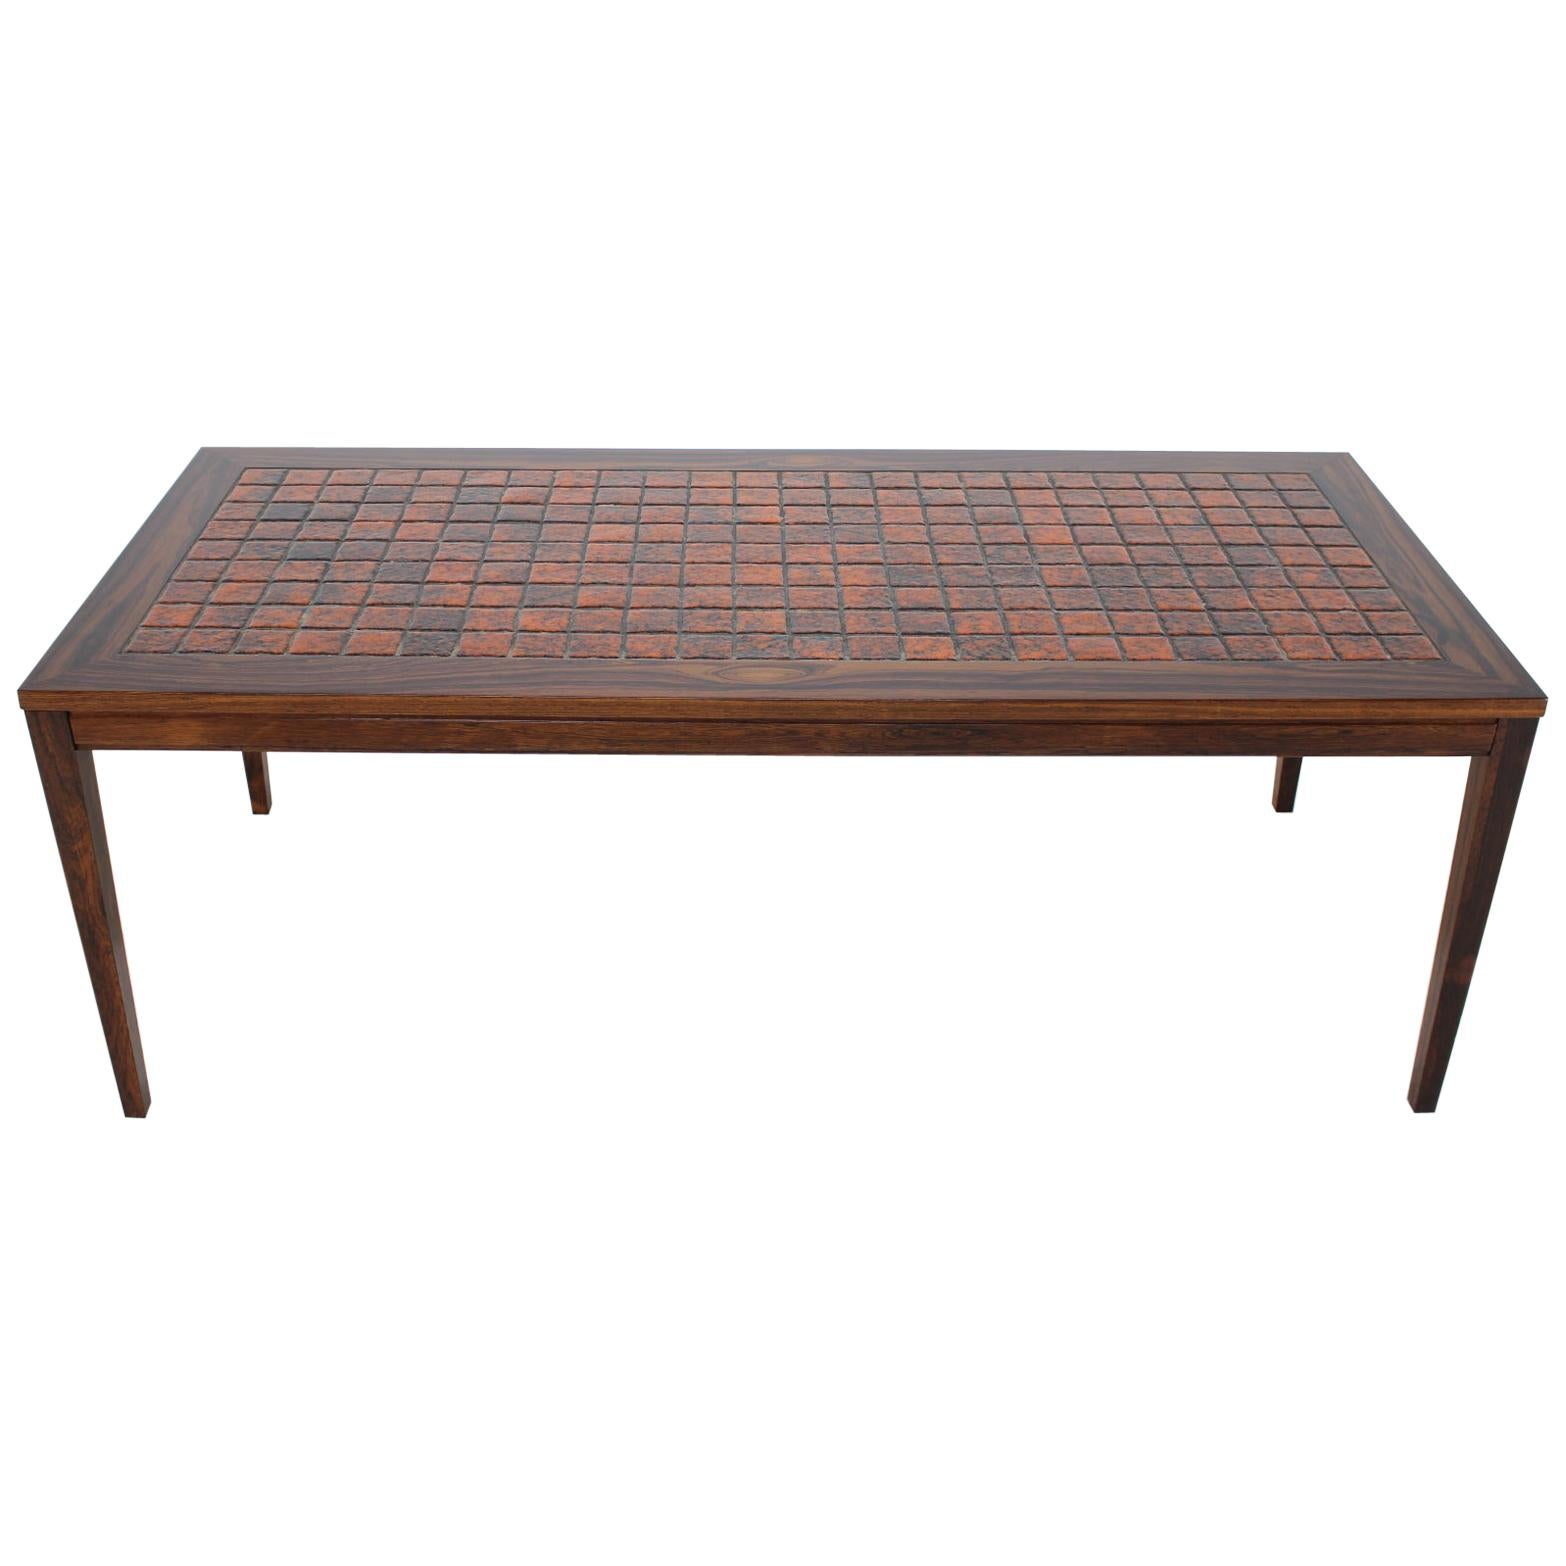 1960 Palisander and Tile Coffee Table, Denmark